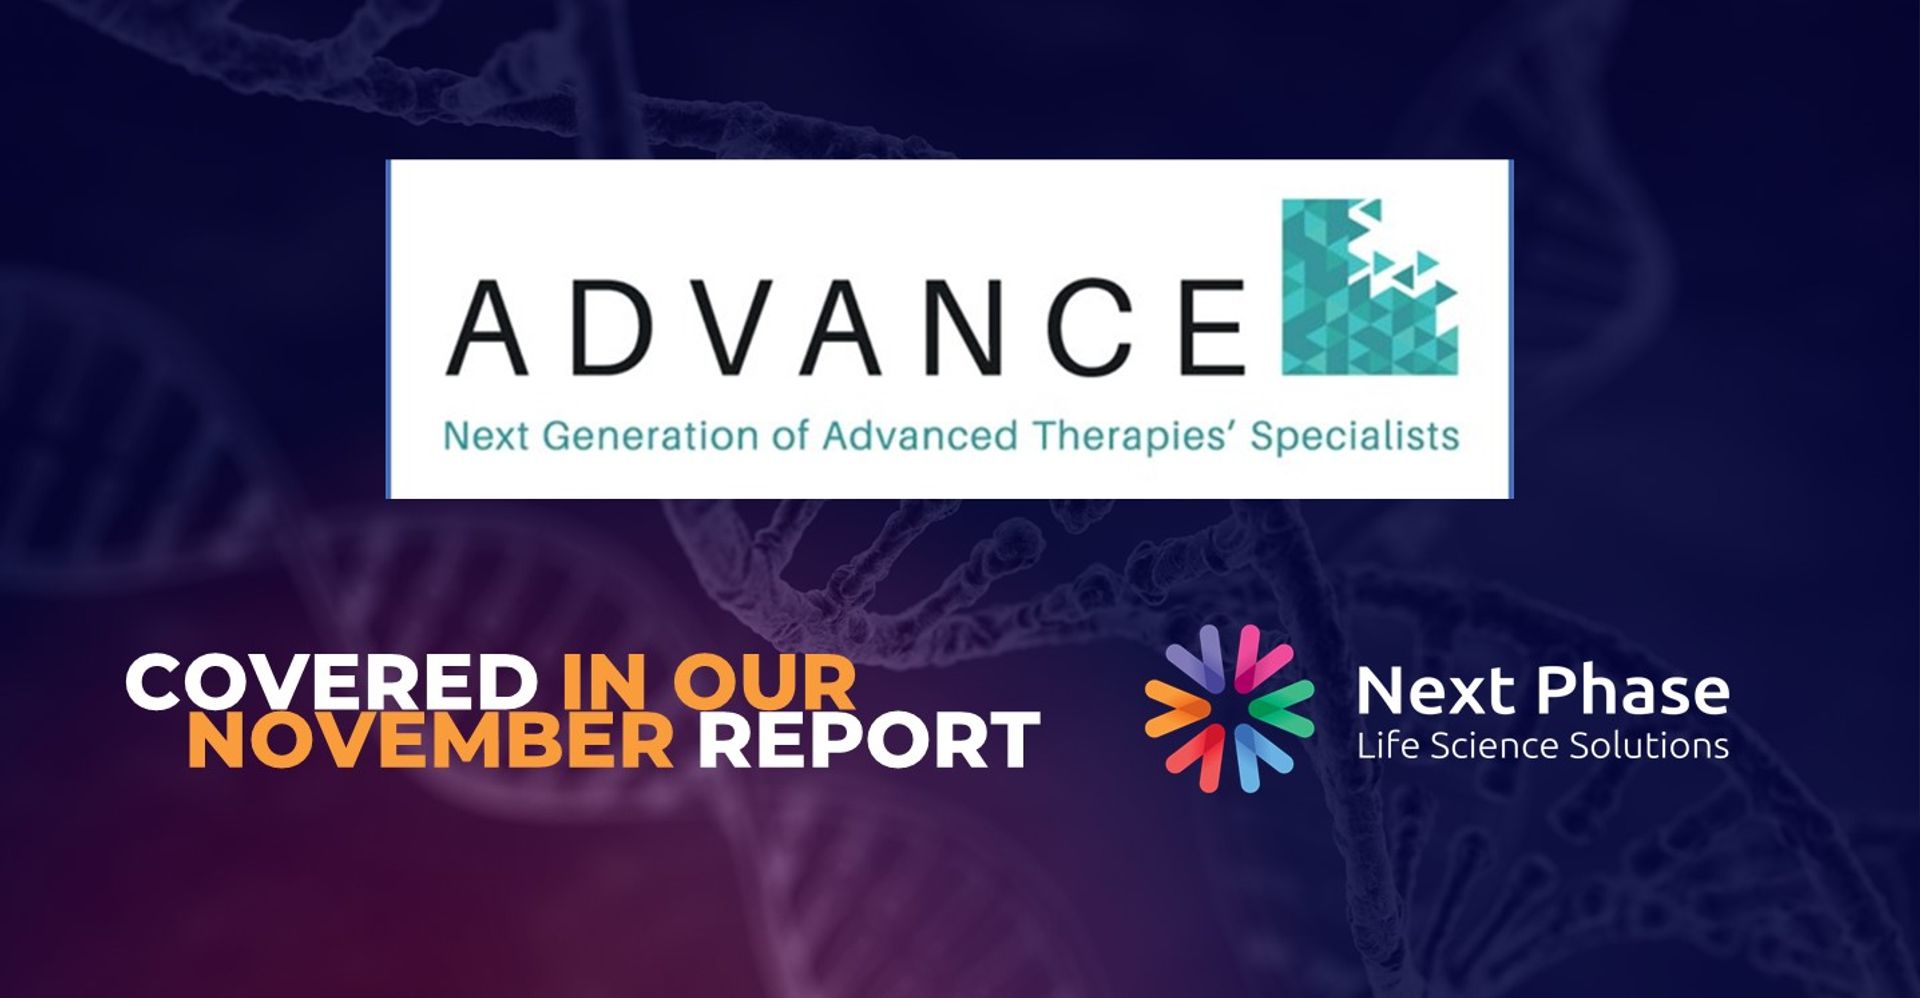 The ADVANCE programme was launched to help support people in the early stages of their ATMP careers. It is a series of self-paced online courses, funded by Erasmus Plus and promoted by Eatris, which enables people to immerse themselves in the world of Advanced Therapies. 